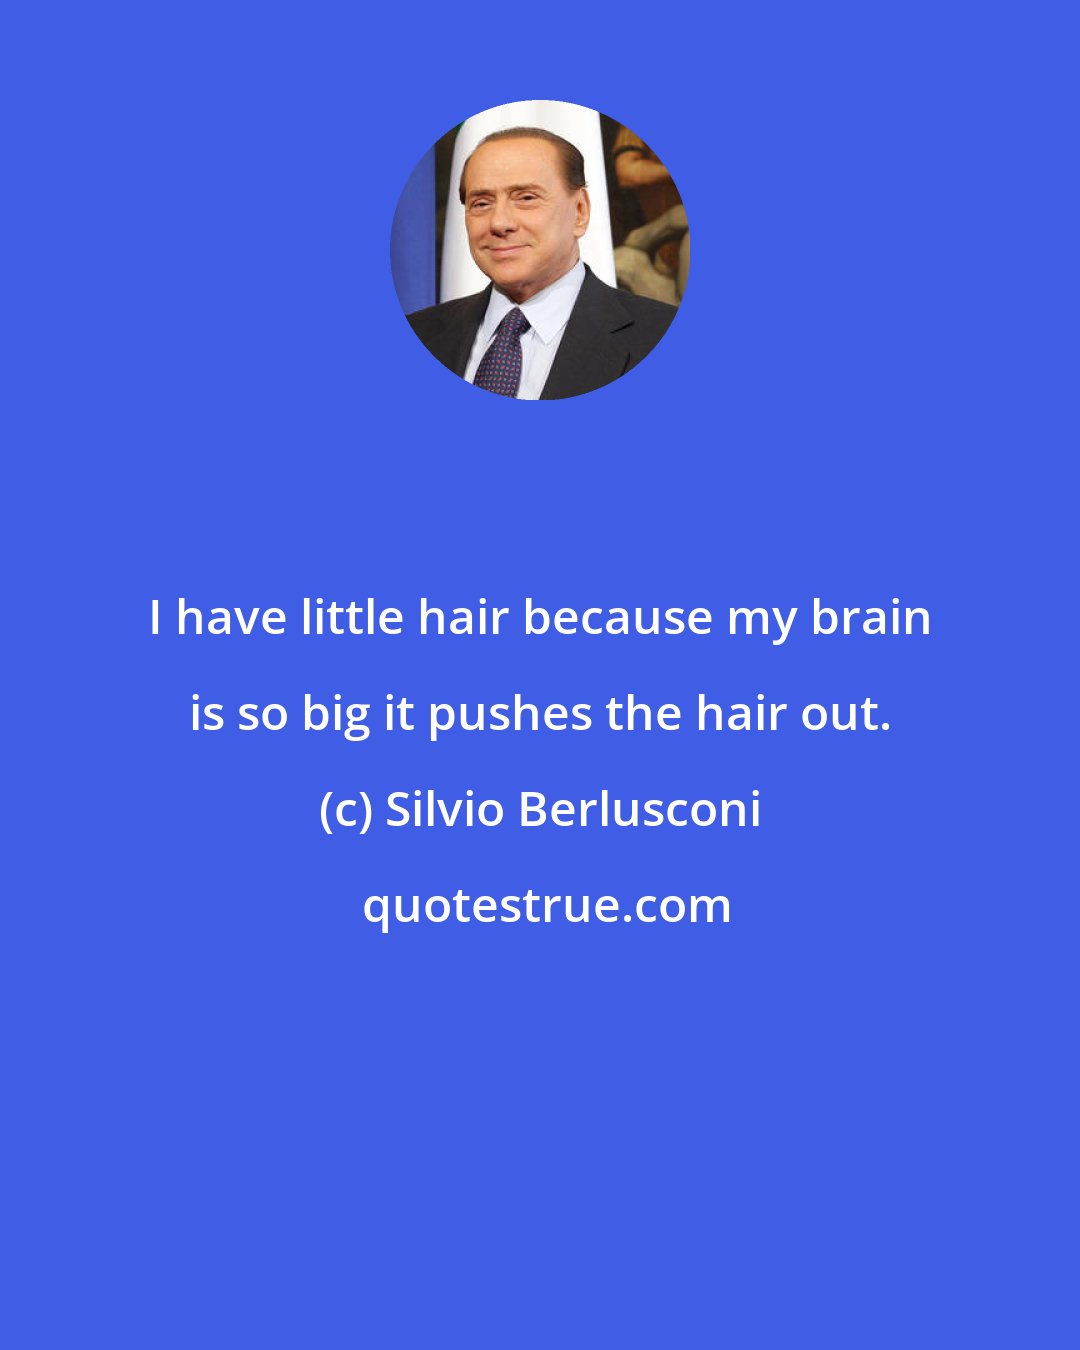 Silvio Berlusconi: I have little hair because my brain is so big it pushes the hair out.